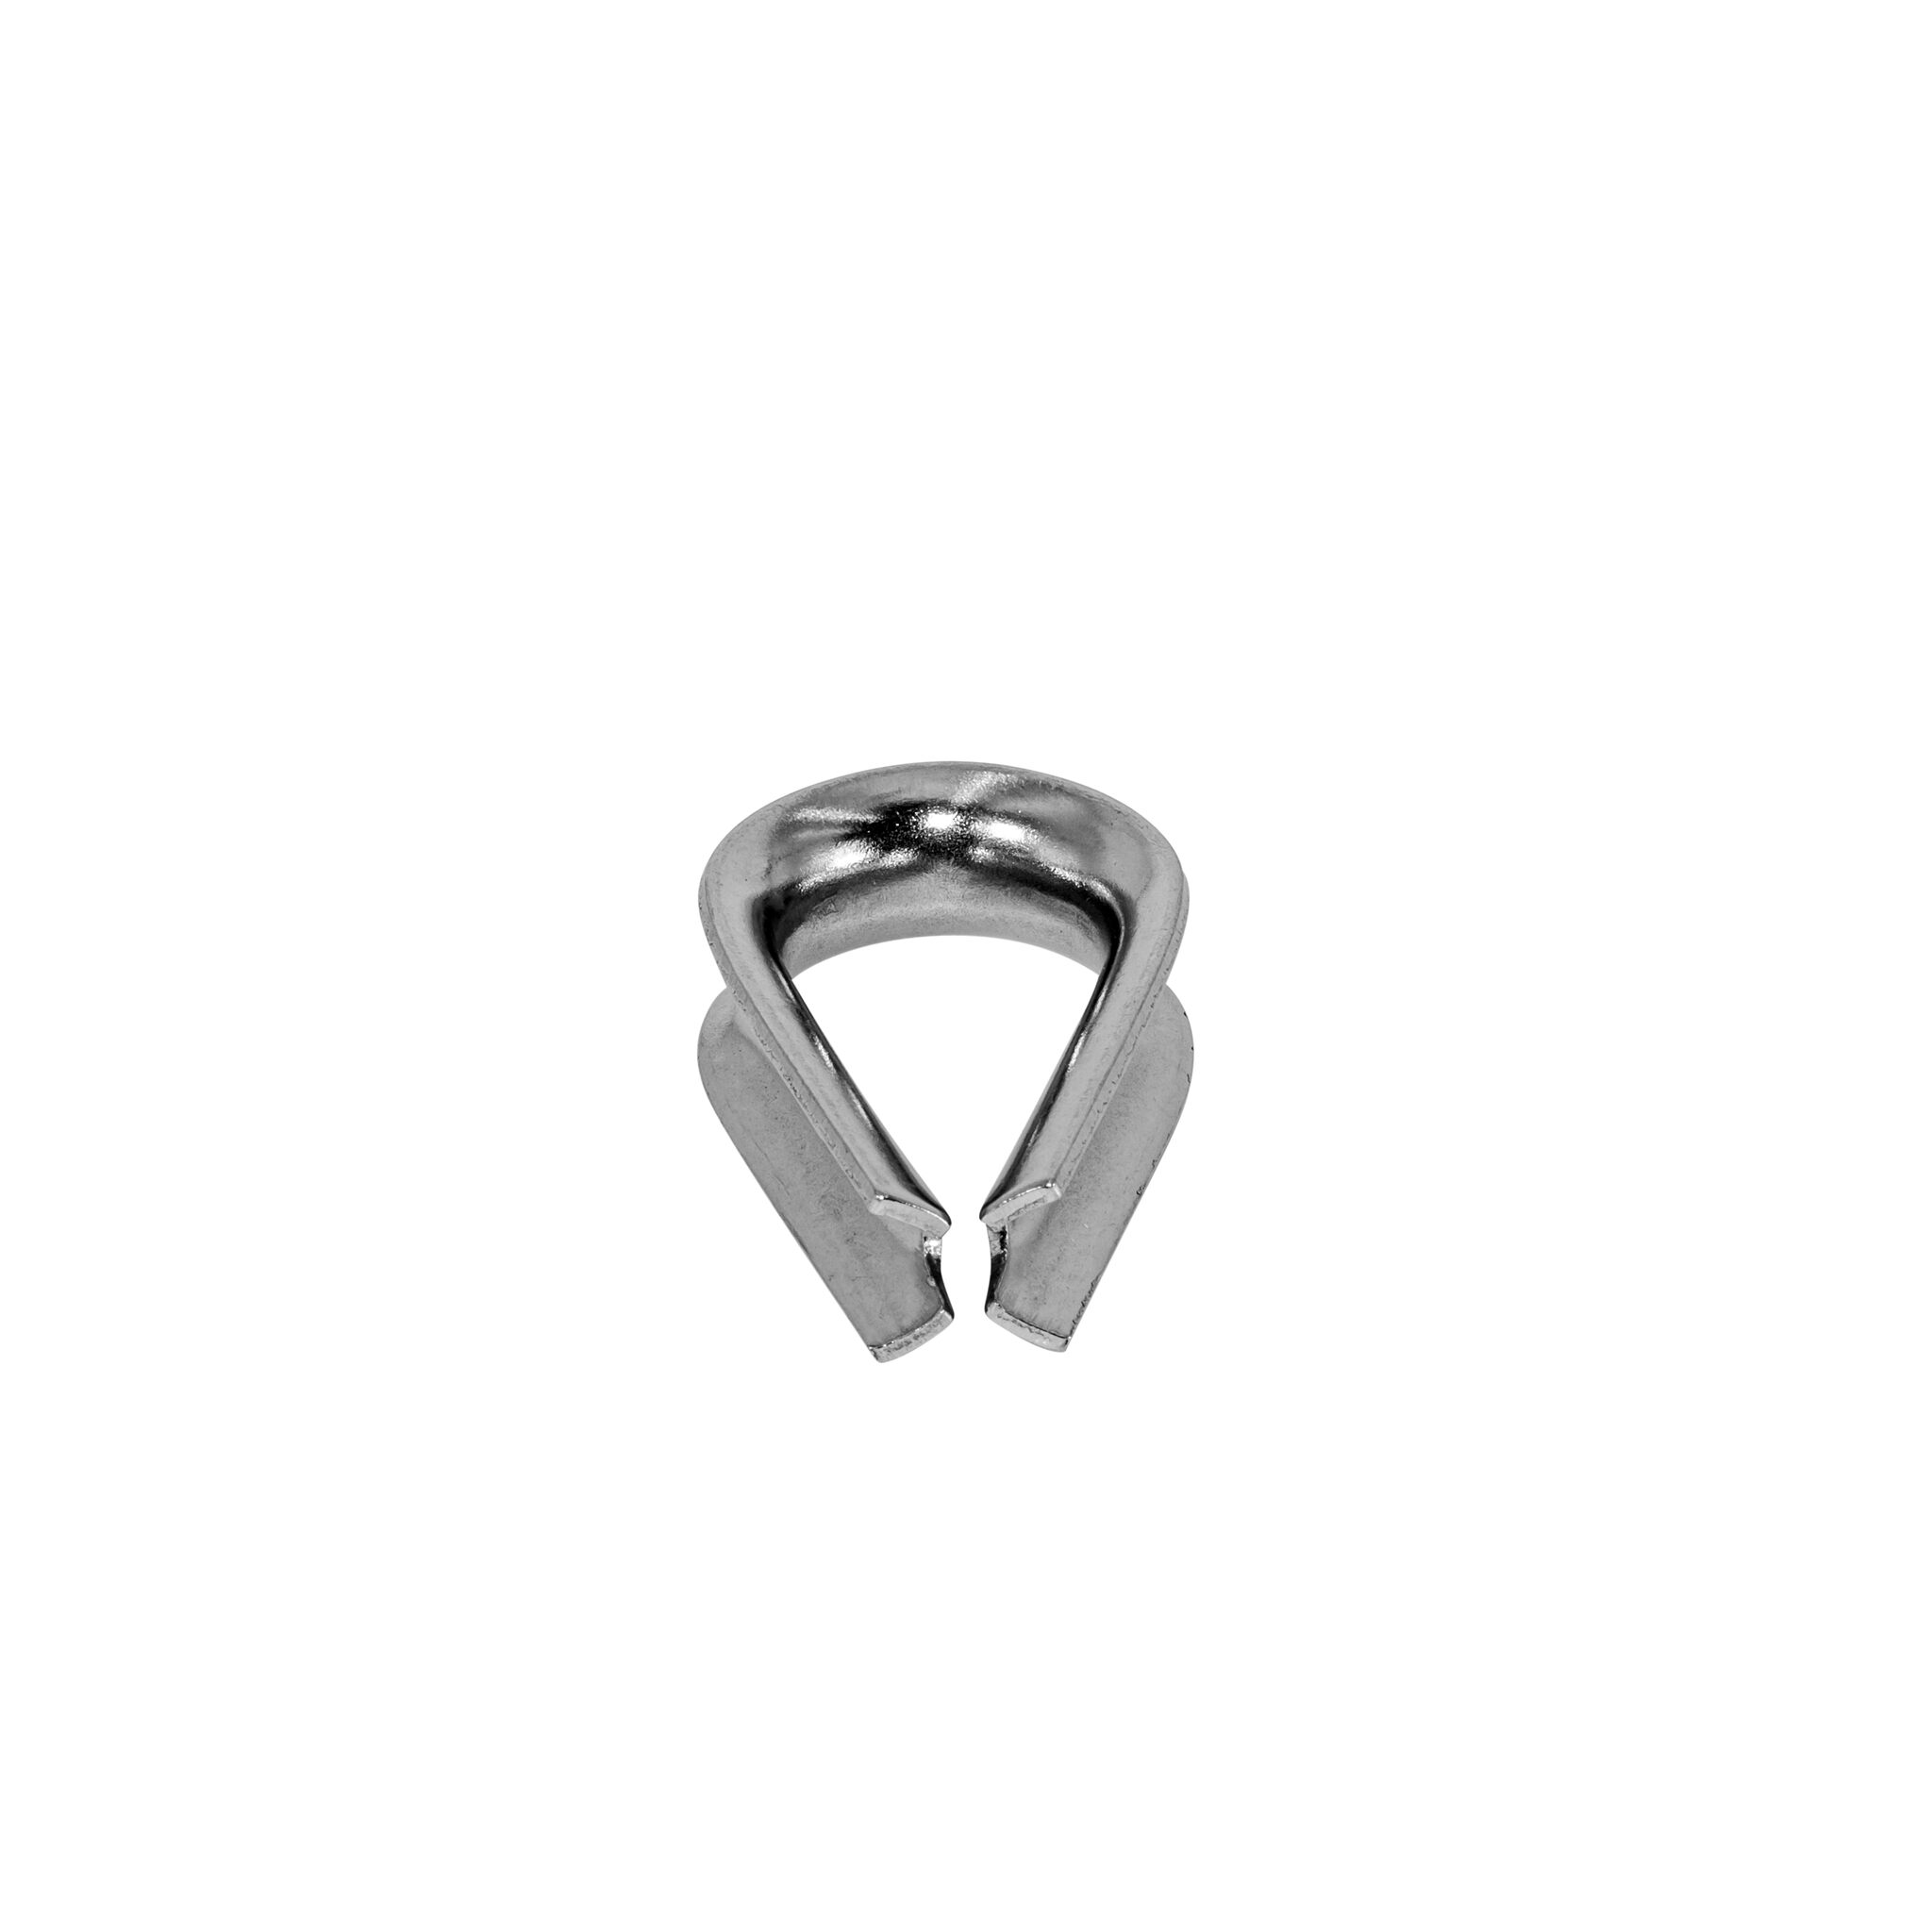 Pointed thimble, V4A steel